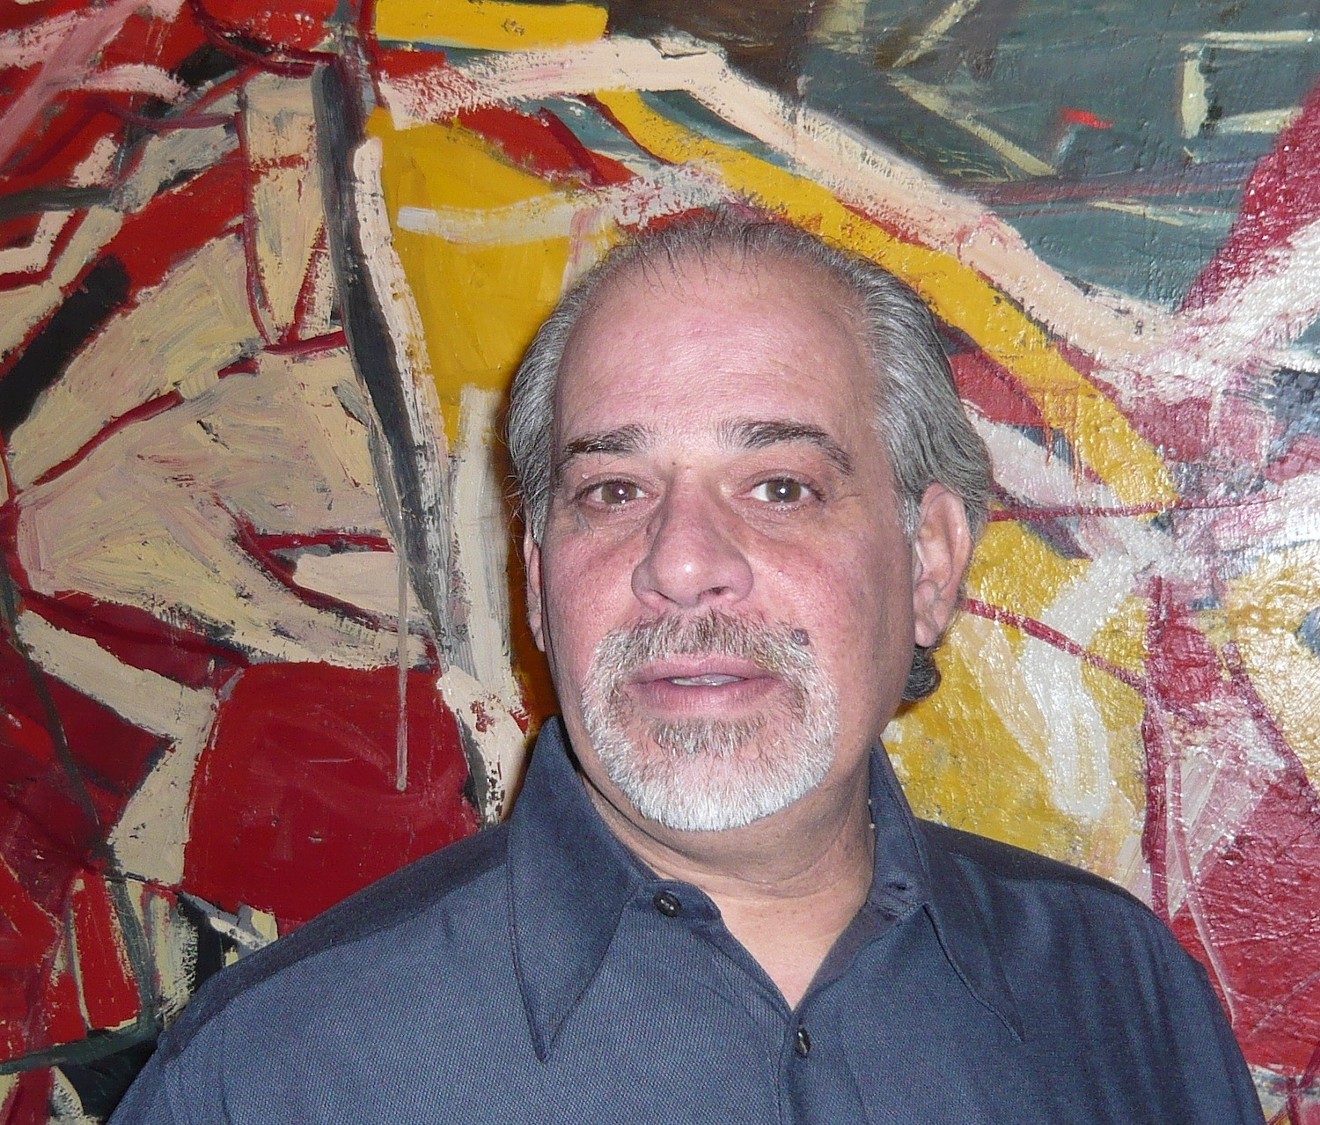 Michael Paglia with a Mark Villarreal painting in the background, 2015.